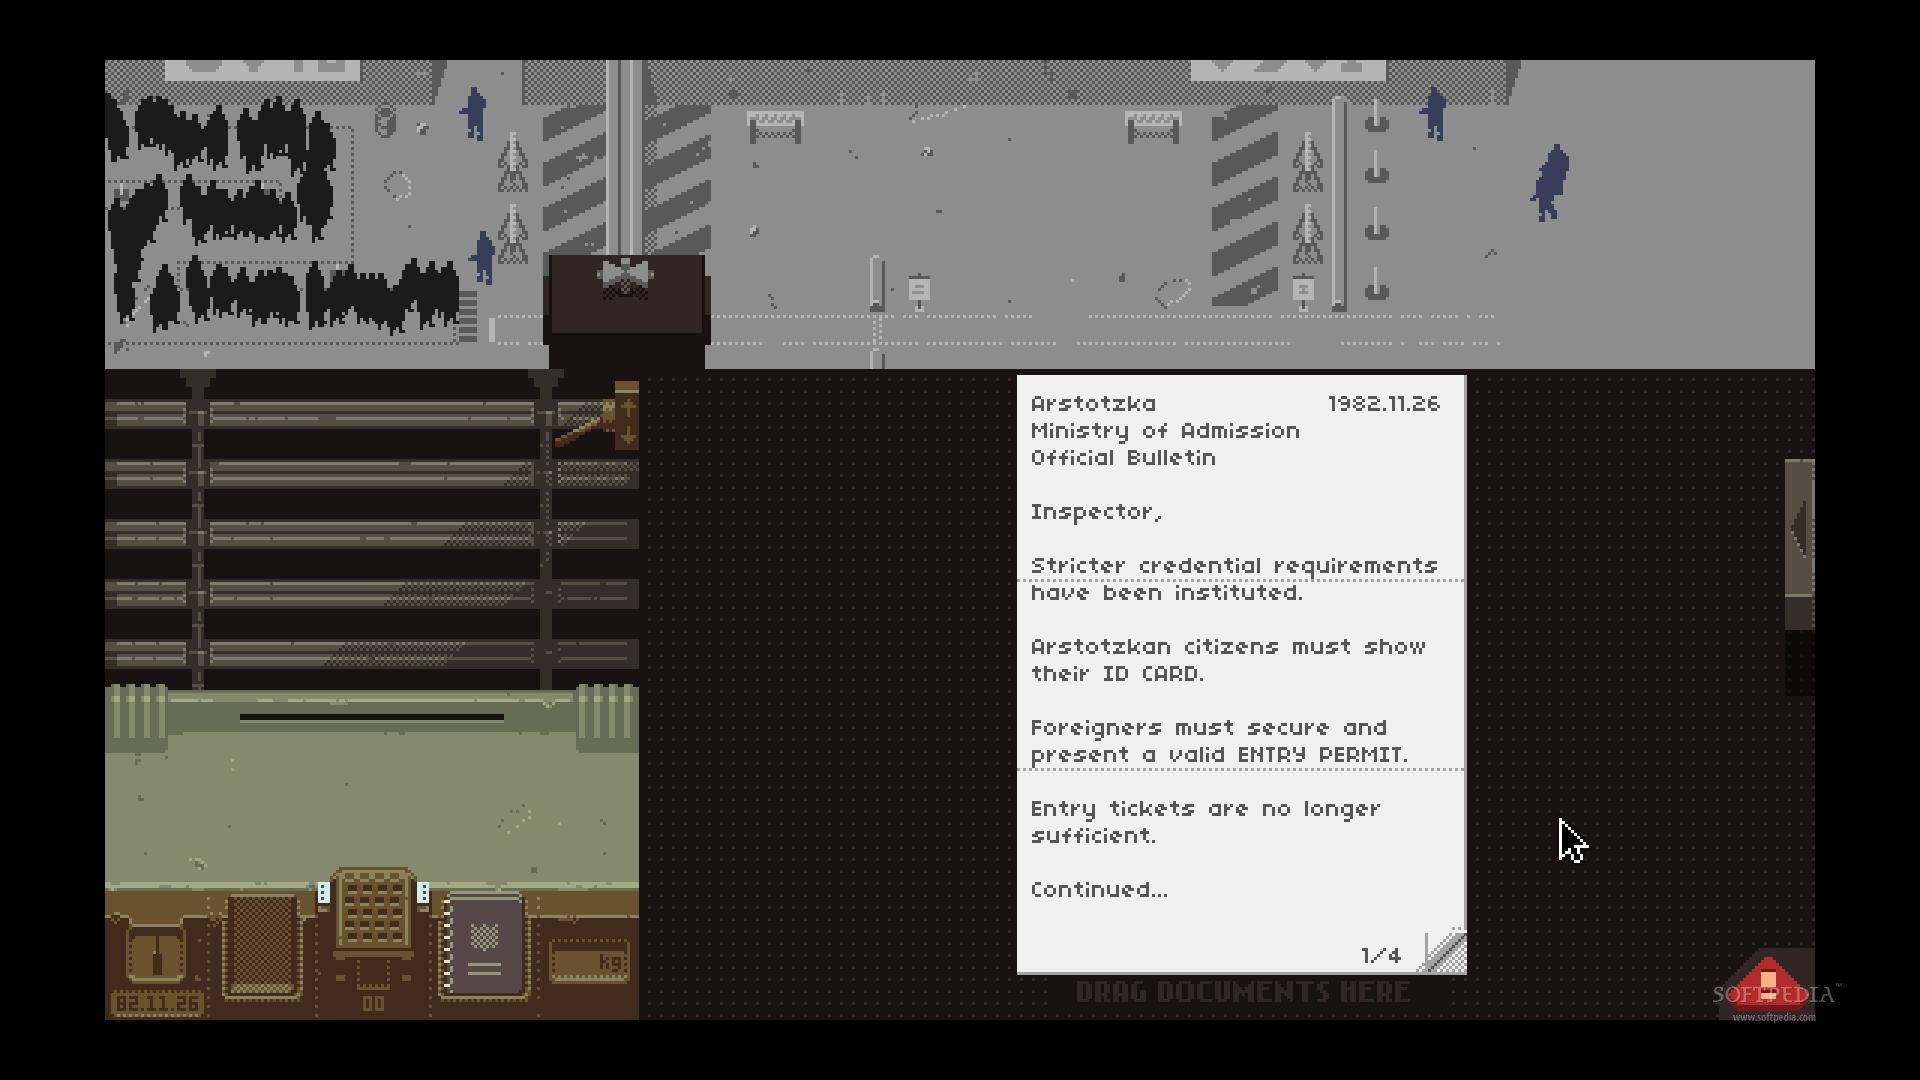 papers please game download free